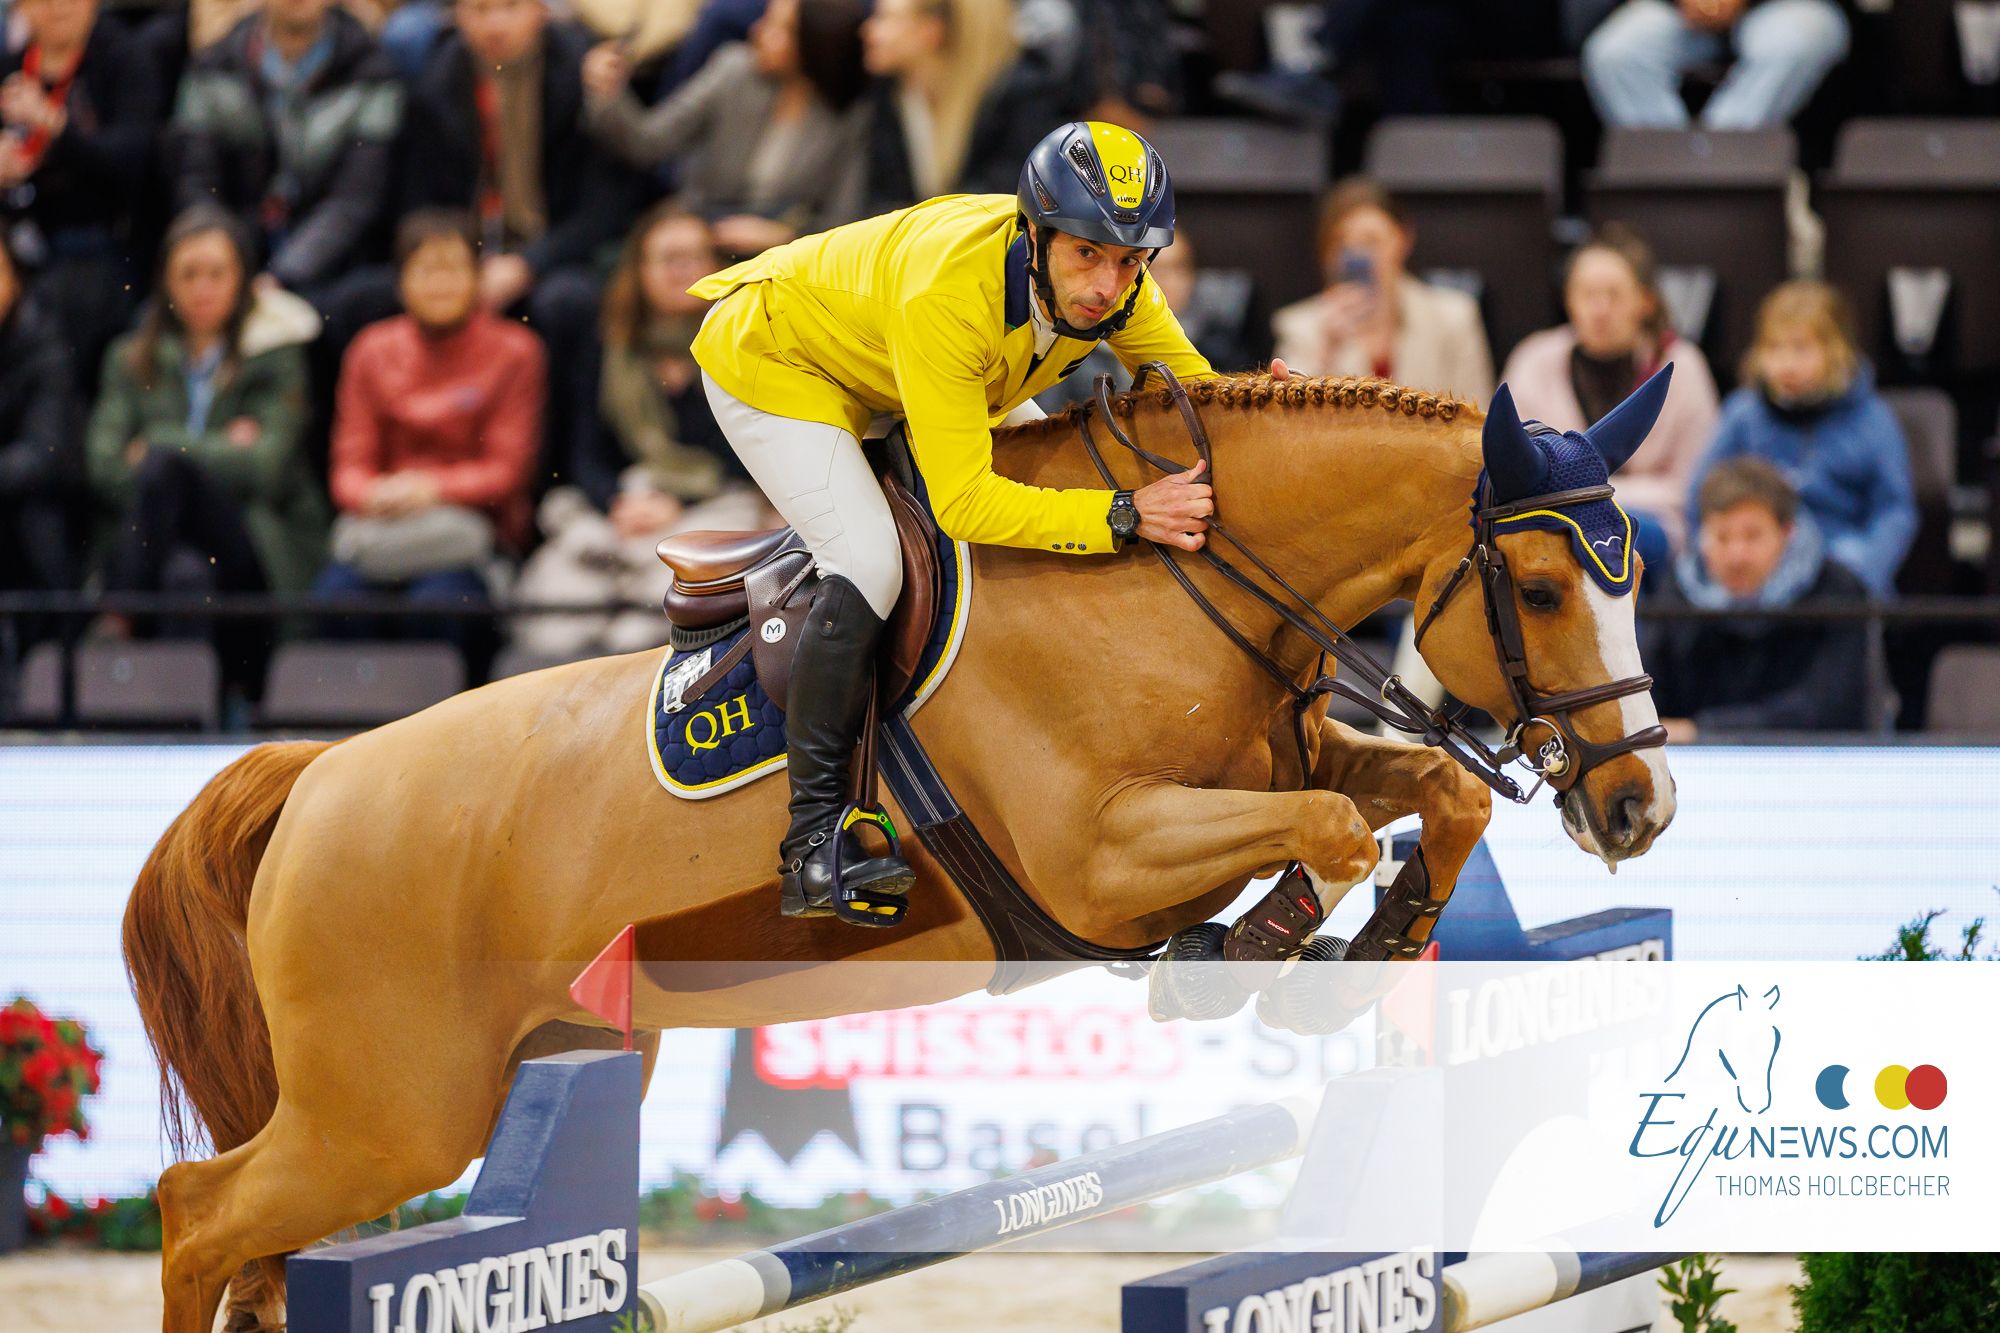 Yuri Mansur and Vitiki charm the crowd in 1.55m Basel. "It's good to have Vitiki back!"